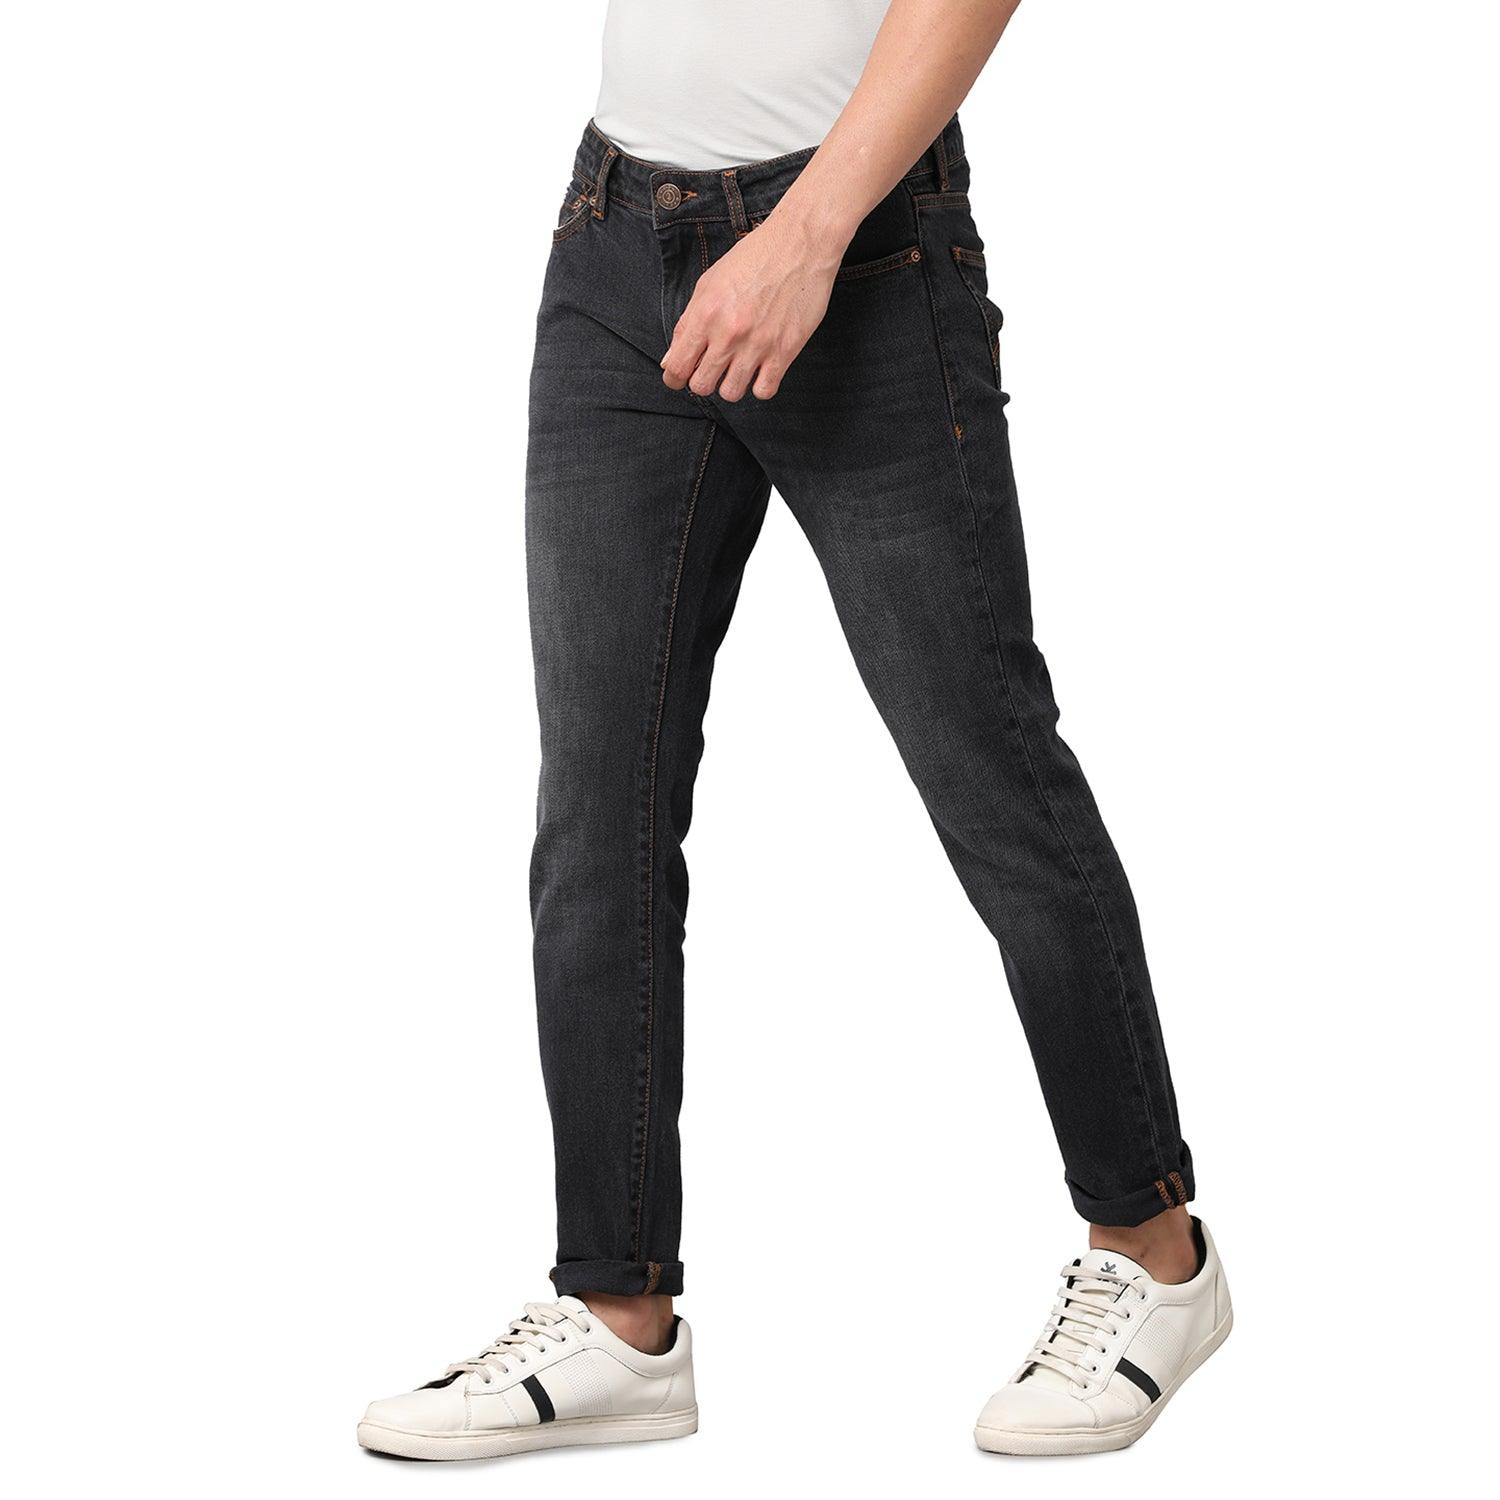 Black Solid Jeans Slim Fit - Double Two